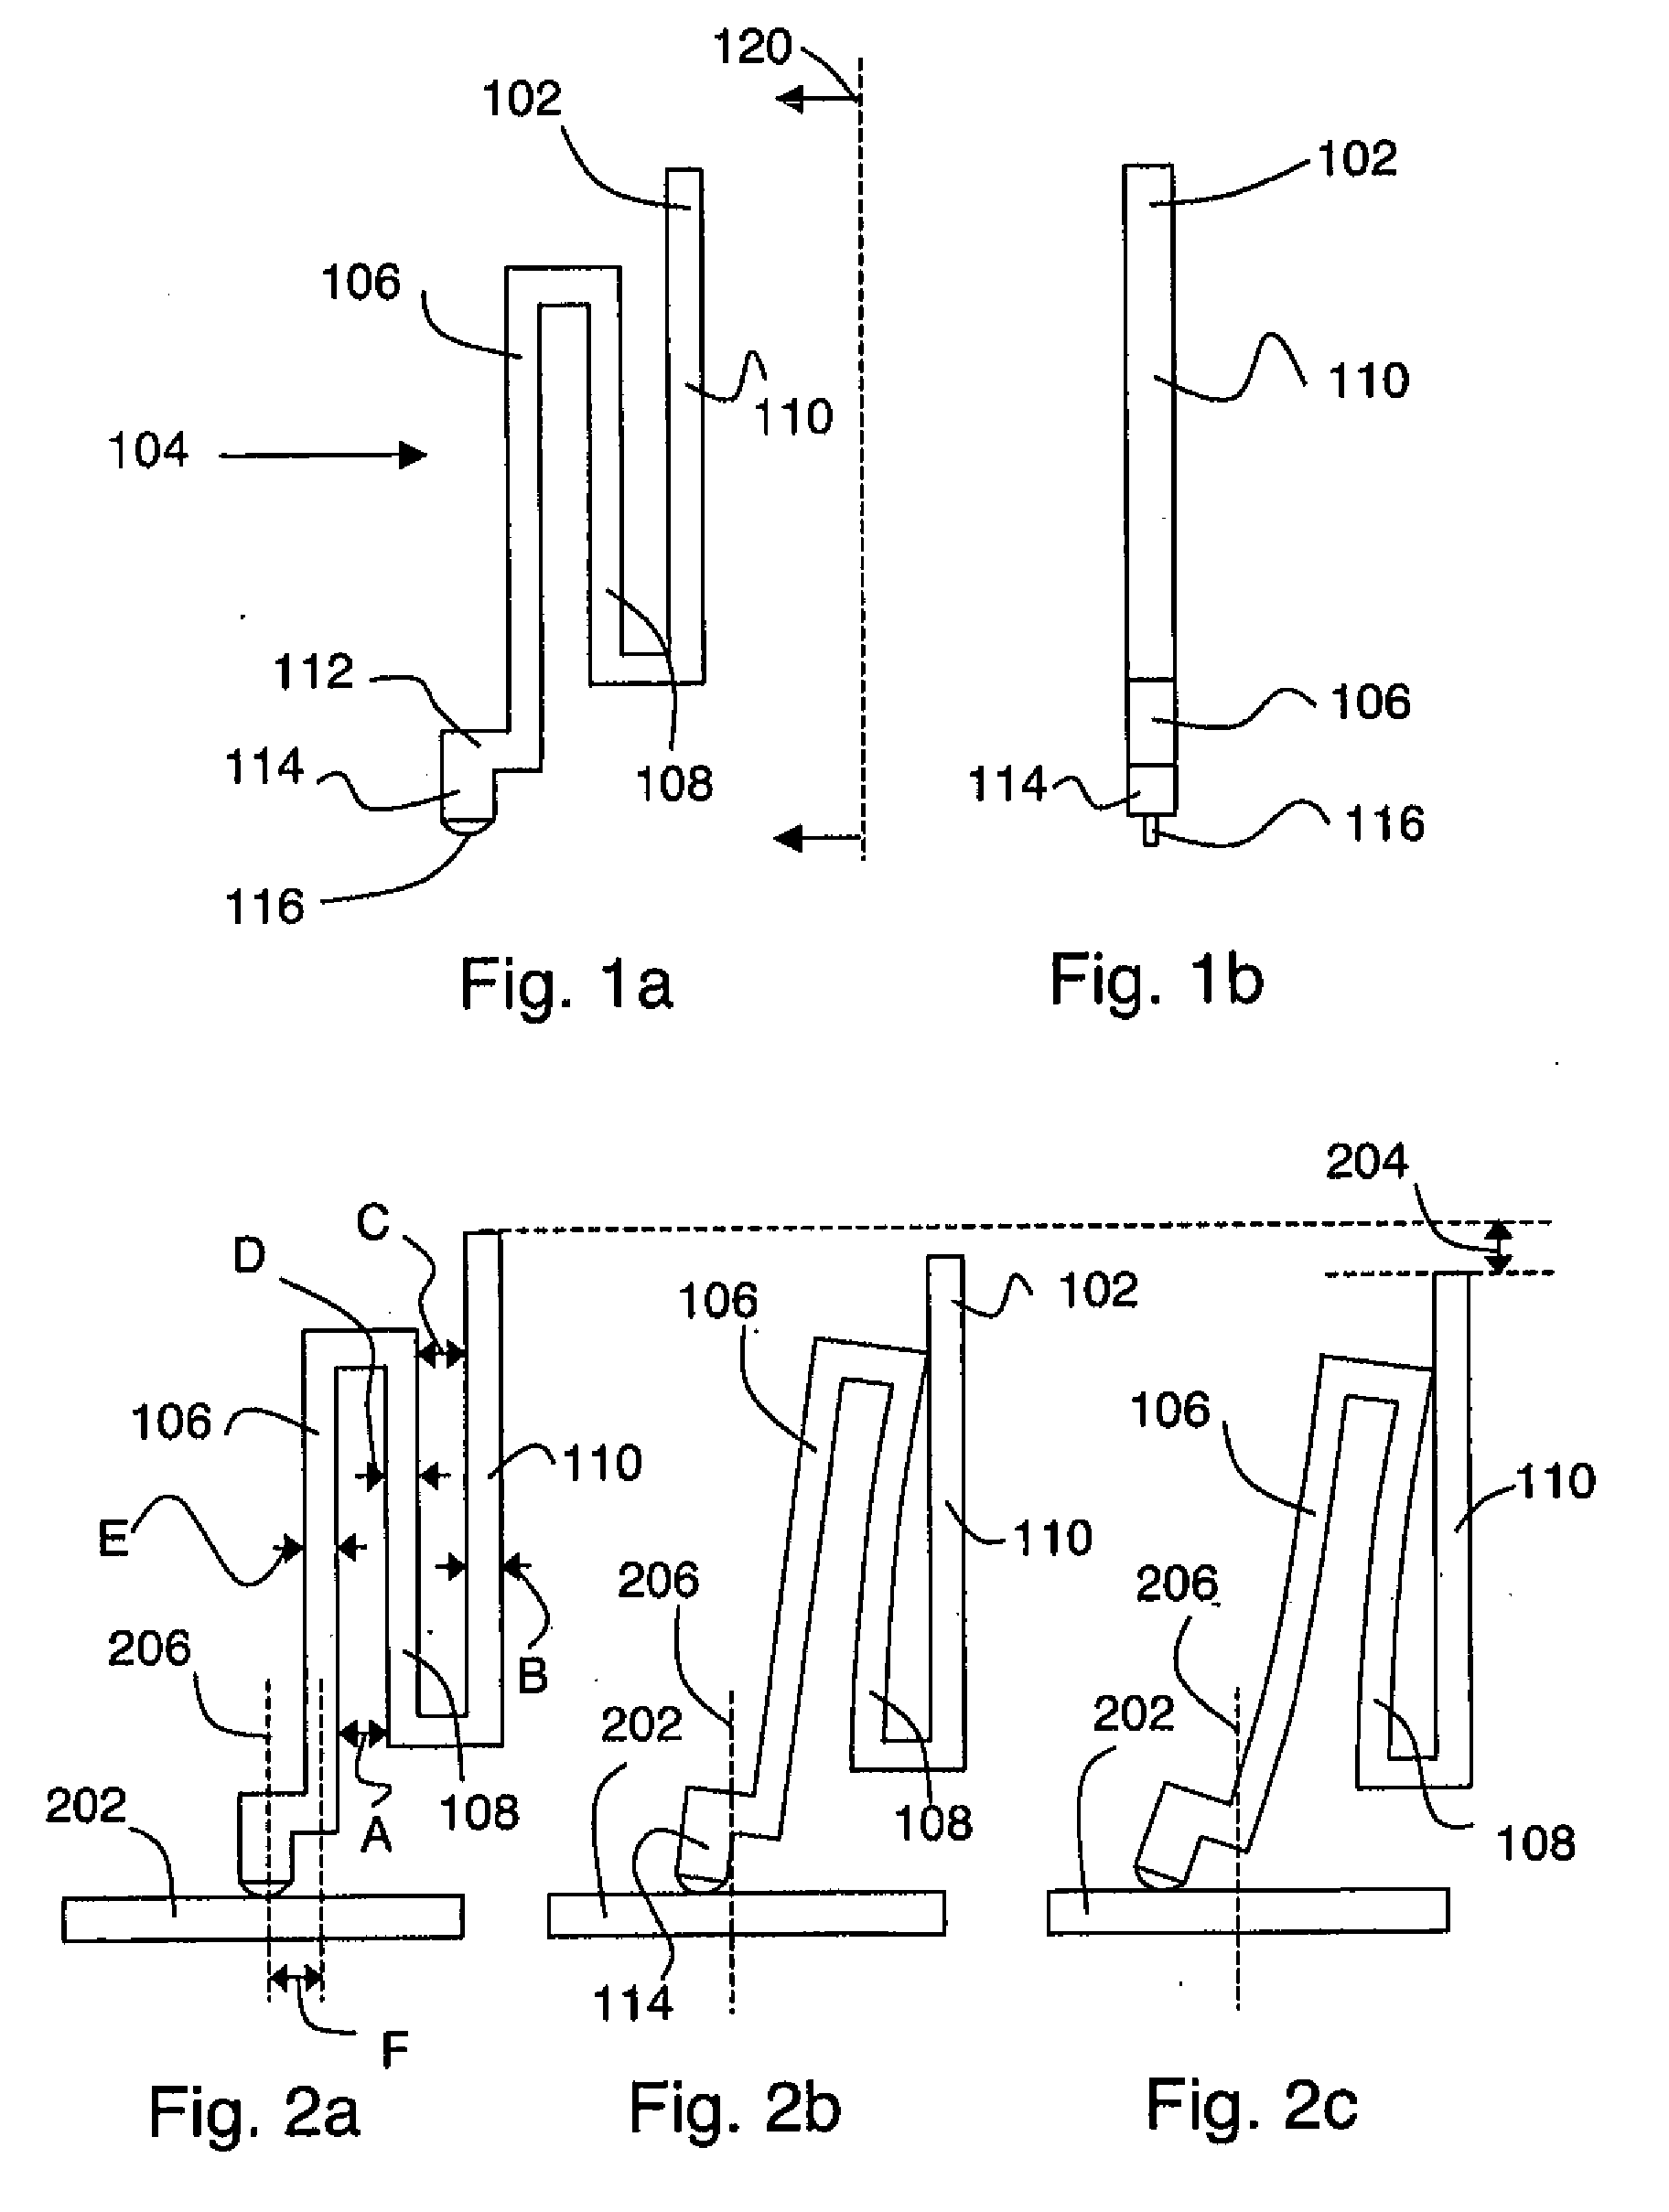 Low Profile Probe Having Improved Mechanical Scrub and Reduced Contact Inductance